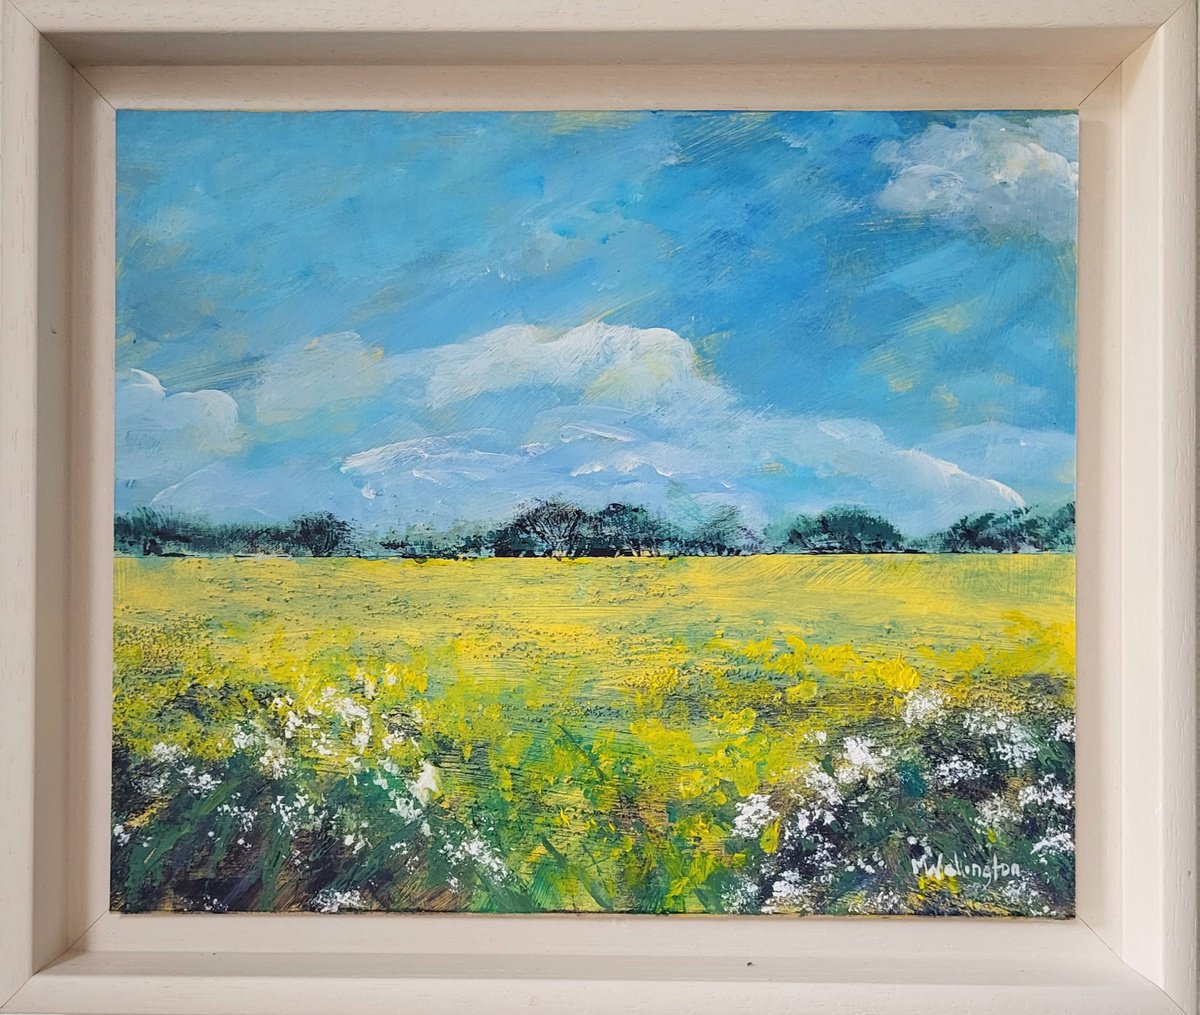 Yellow Field of Summer, Oxfordshire by Michele Wallington